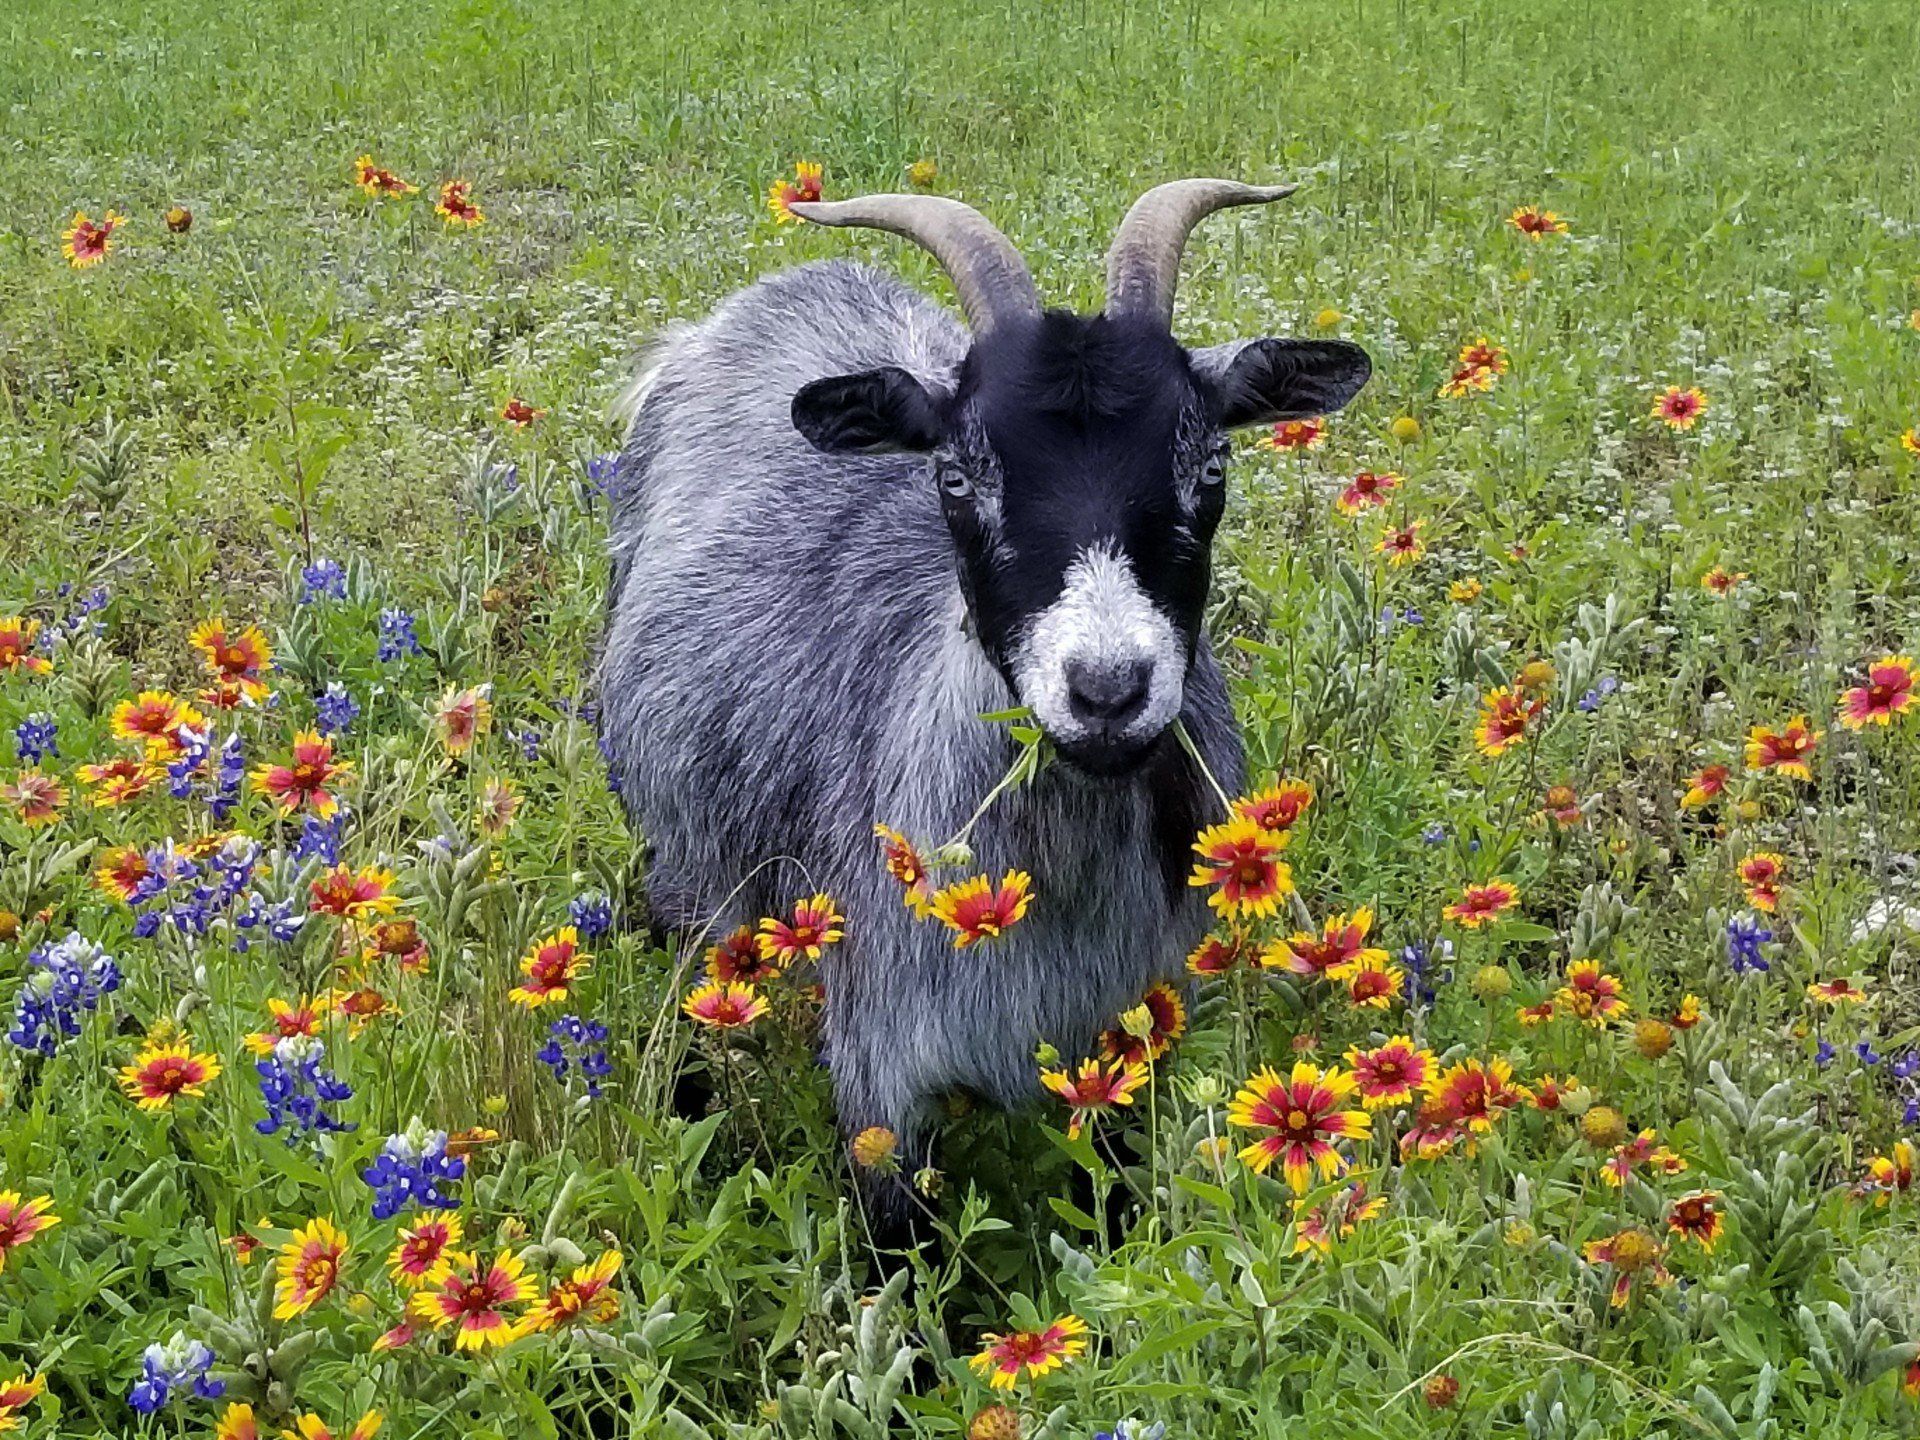 Goat eating flowers note cards